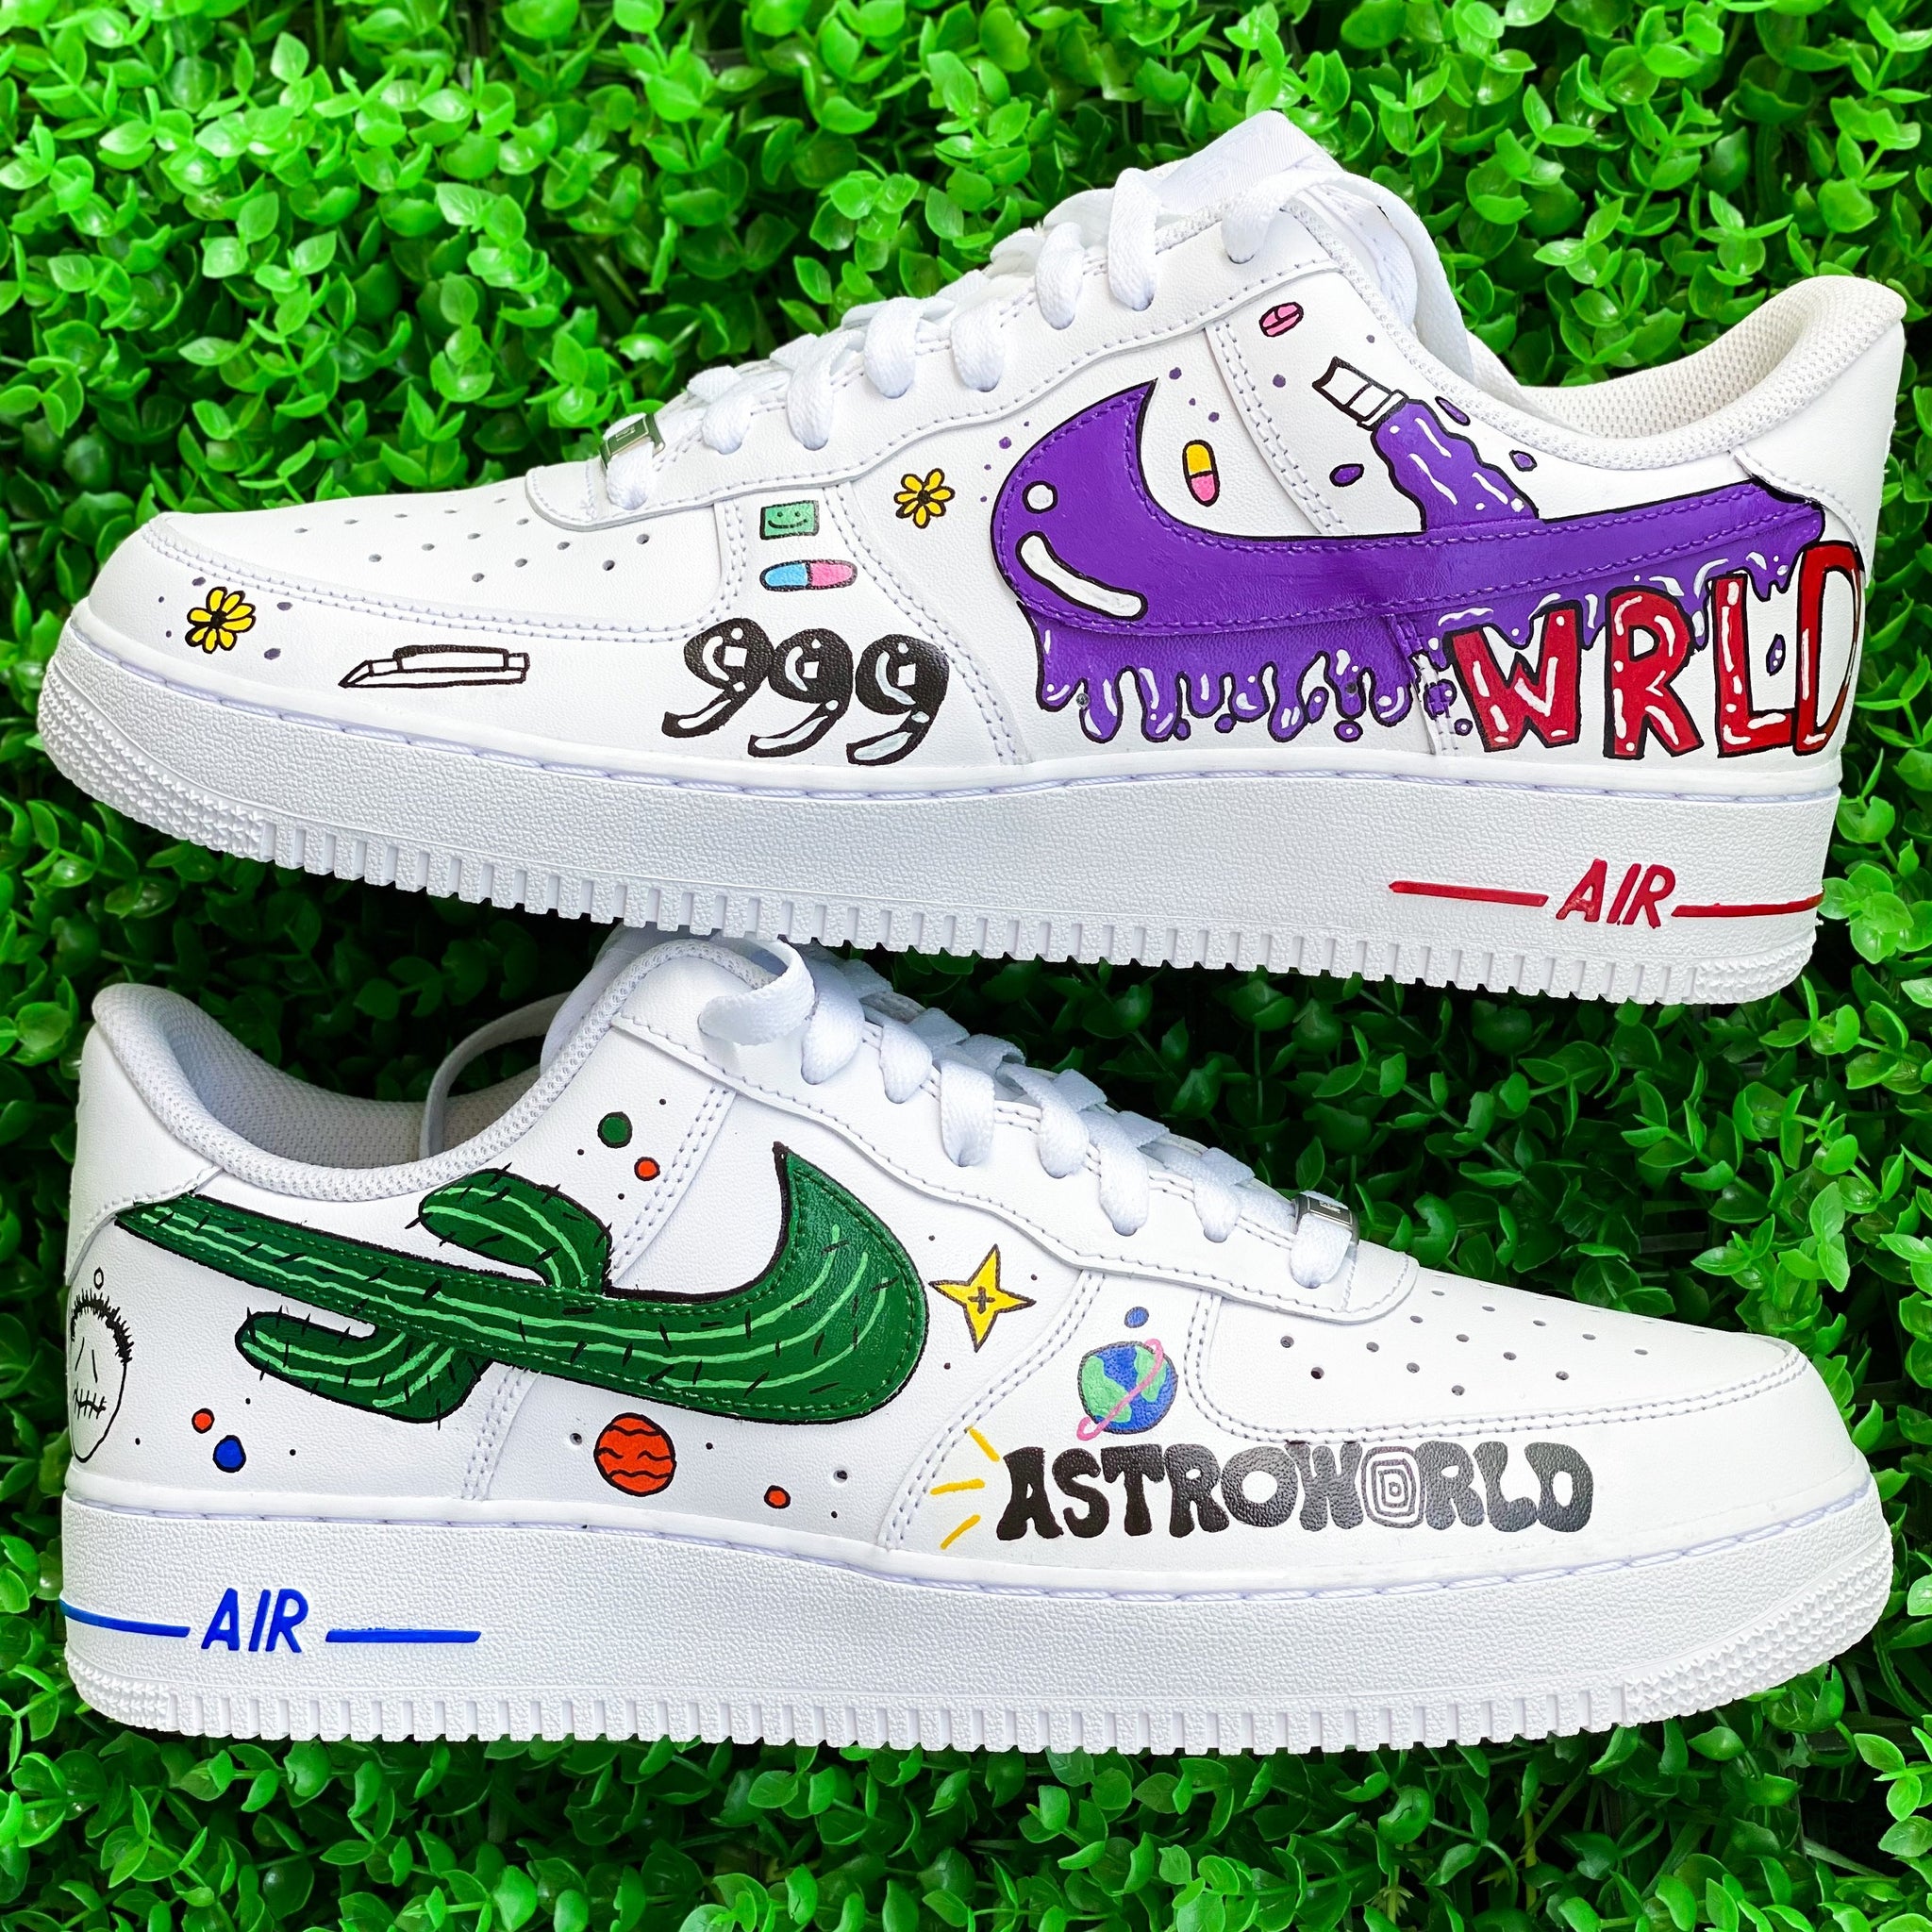 astroworld shoes nike